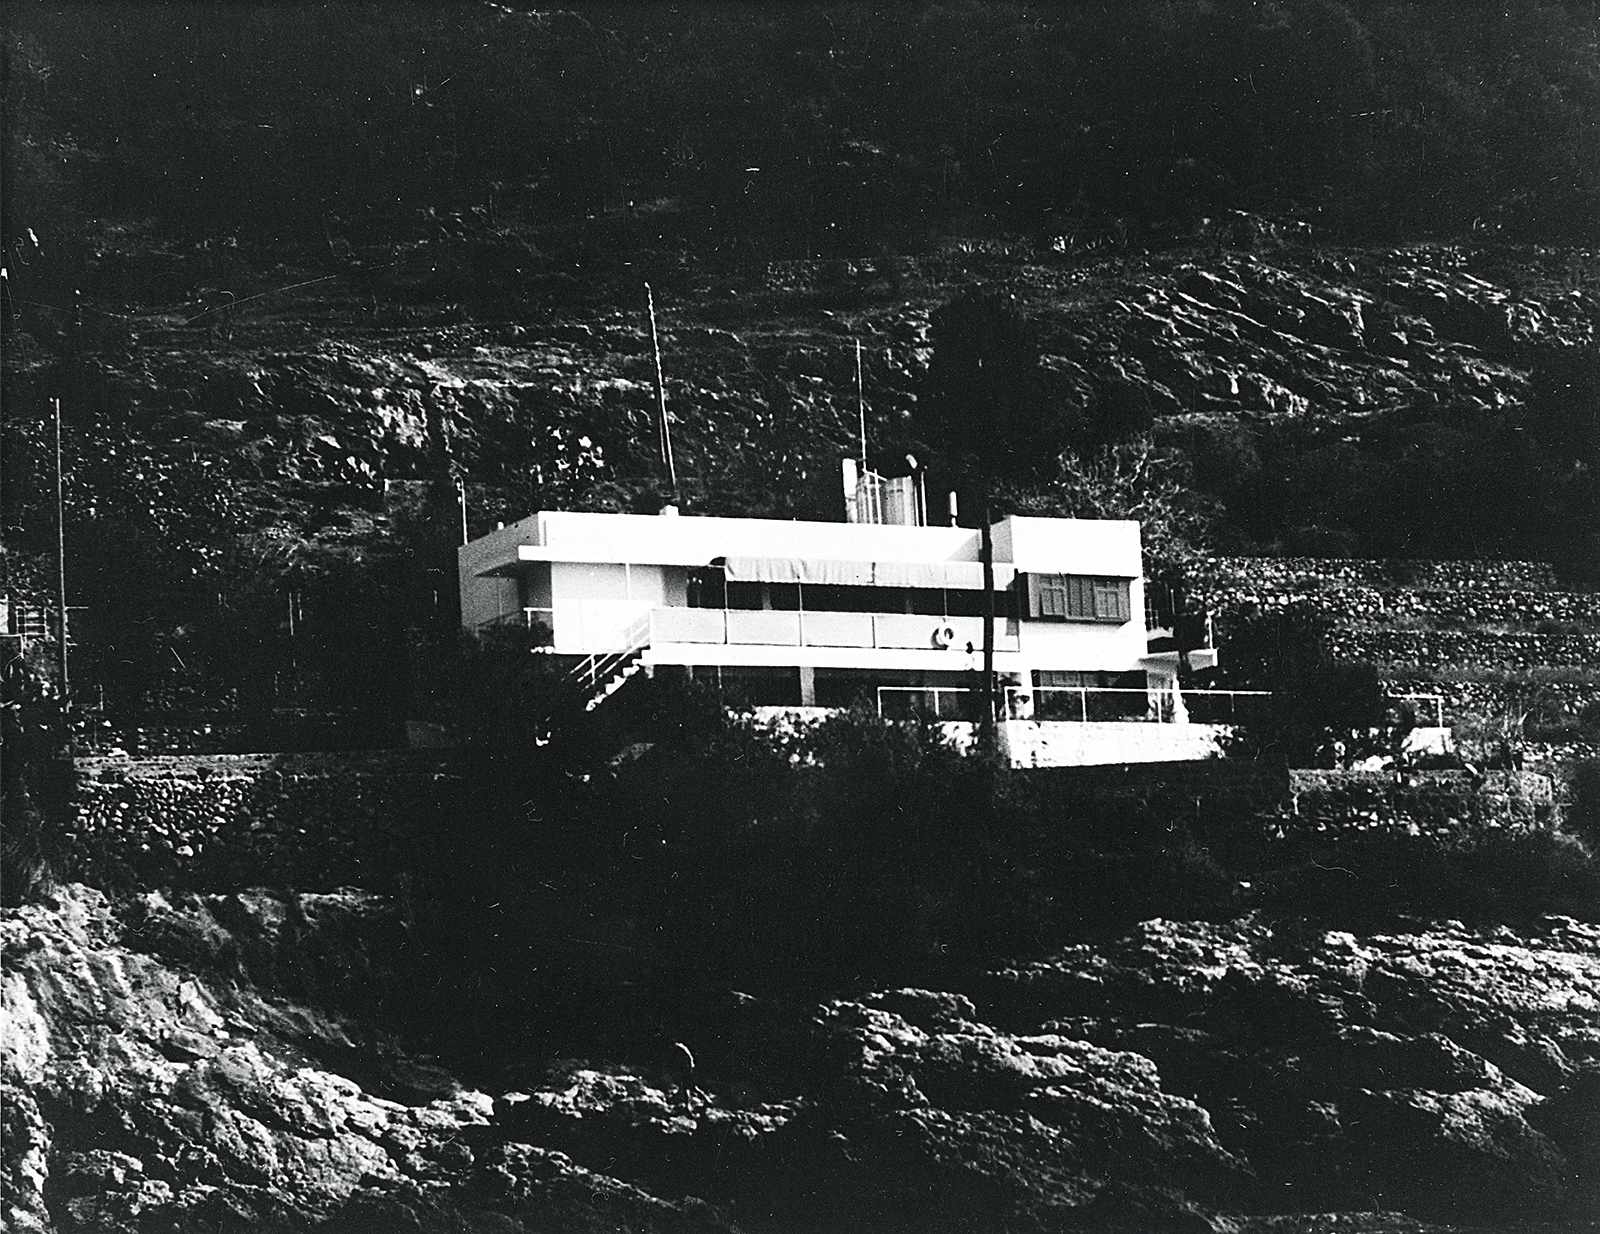 Black and white view of Eileen Gray's seaside house E 1027 seen from the Mediterranean Sea.